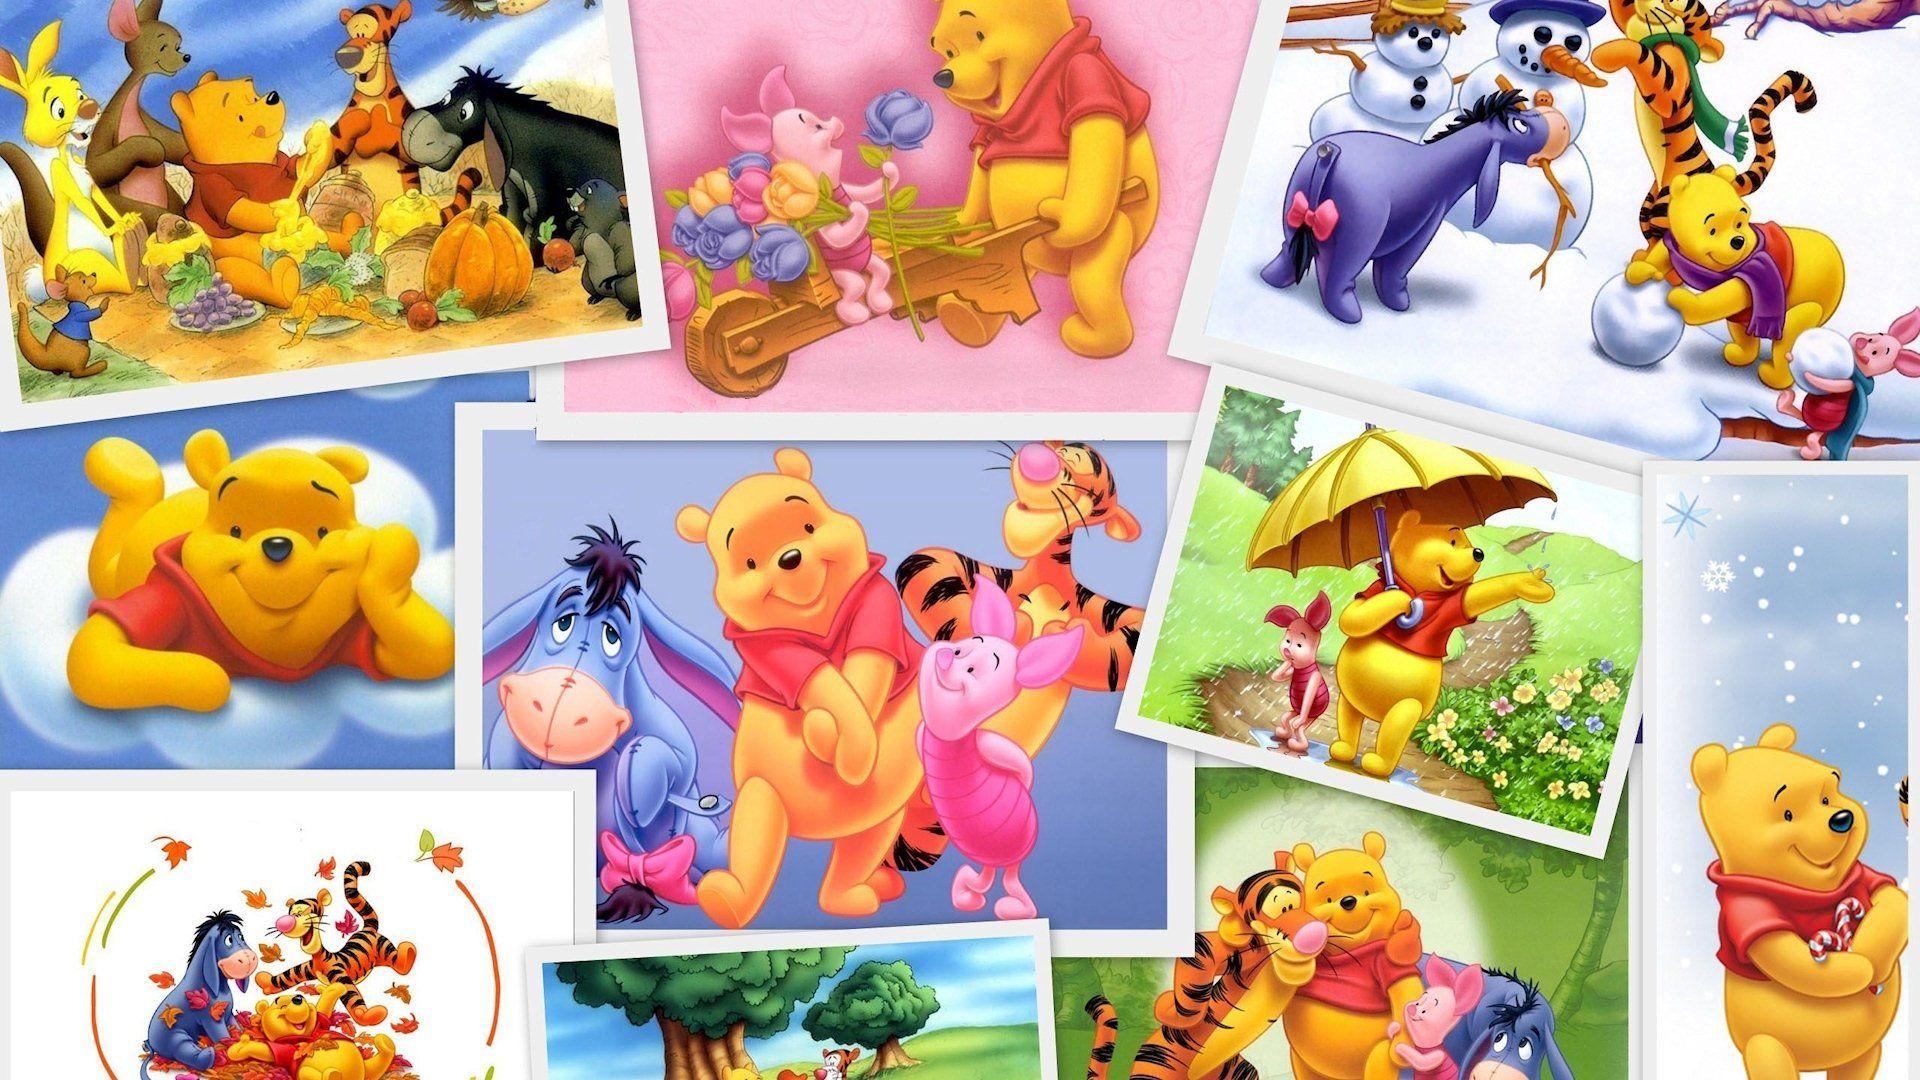 Wallpapers Winnie The Pooh Baby Wallpaper Cave